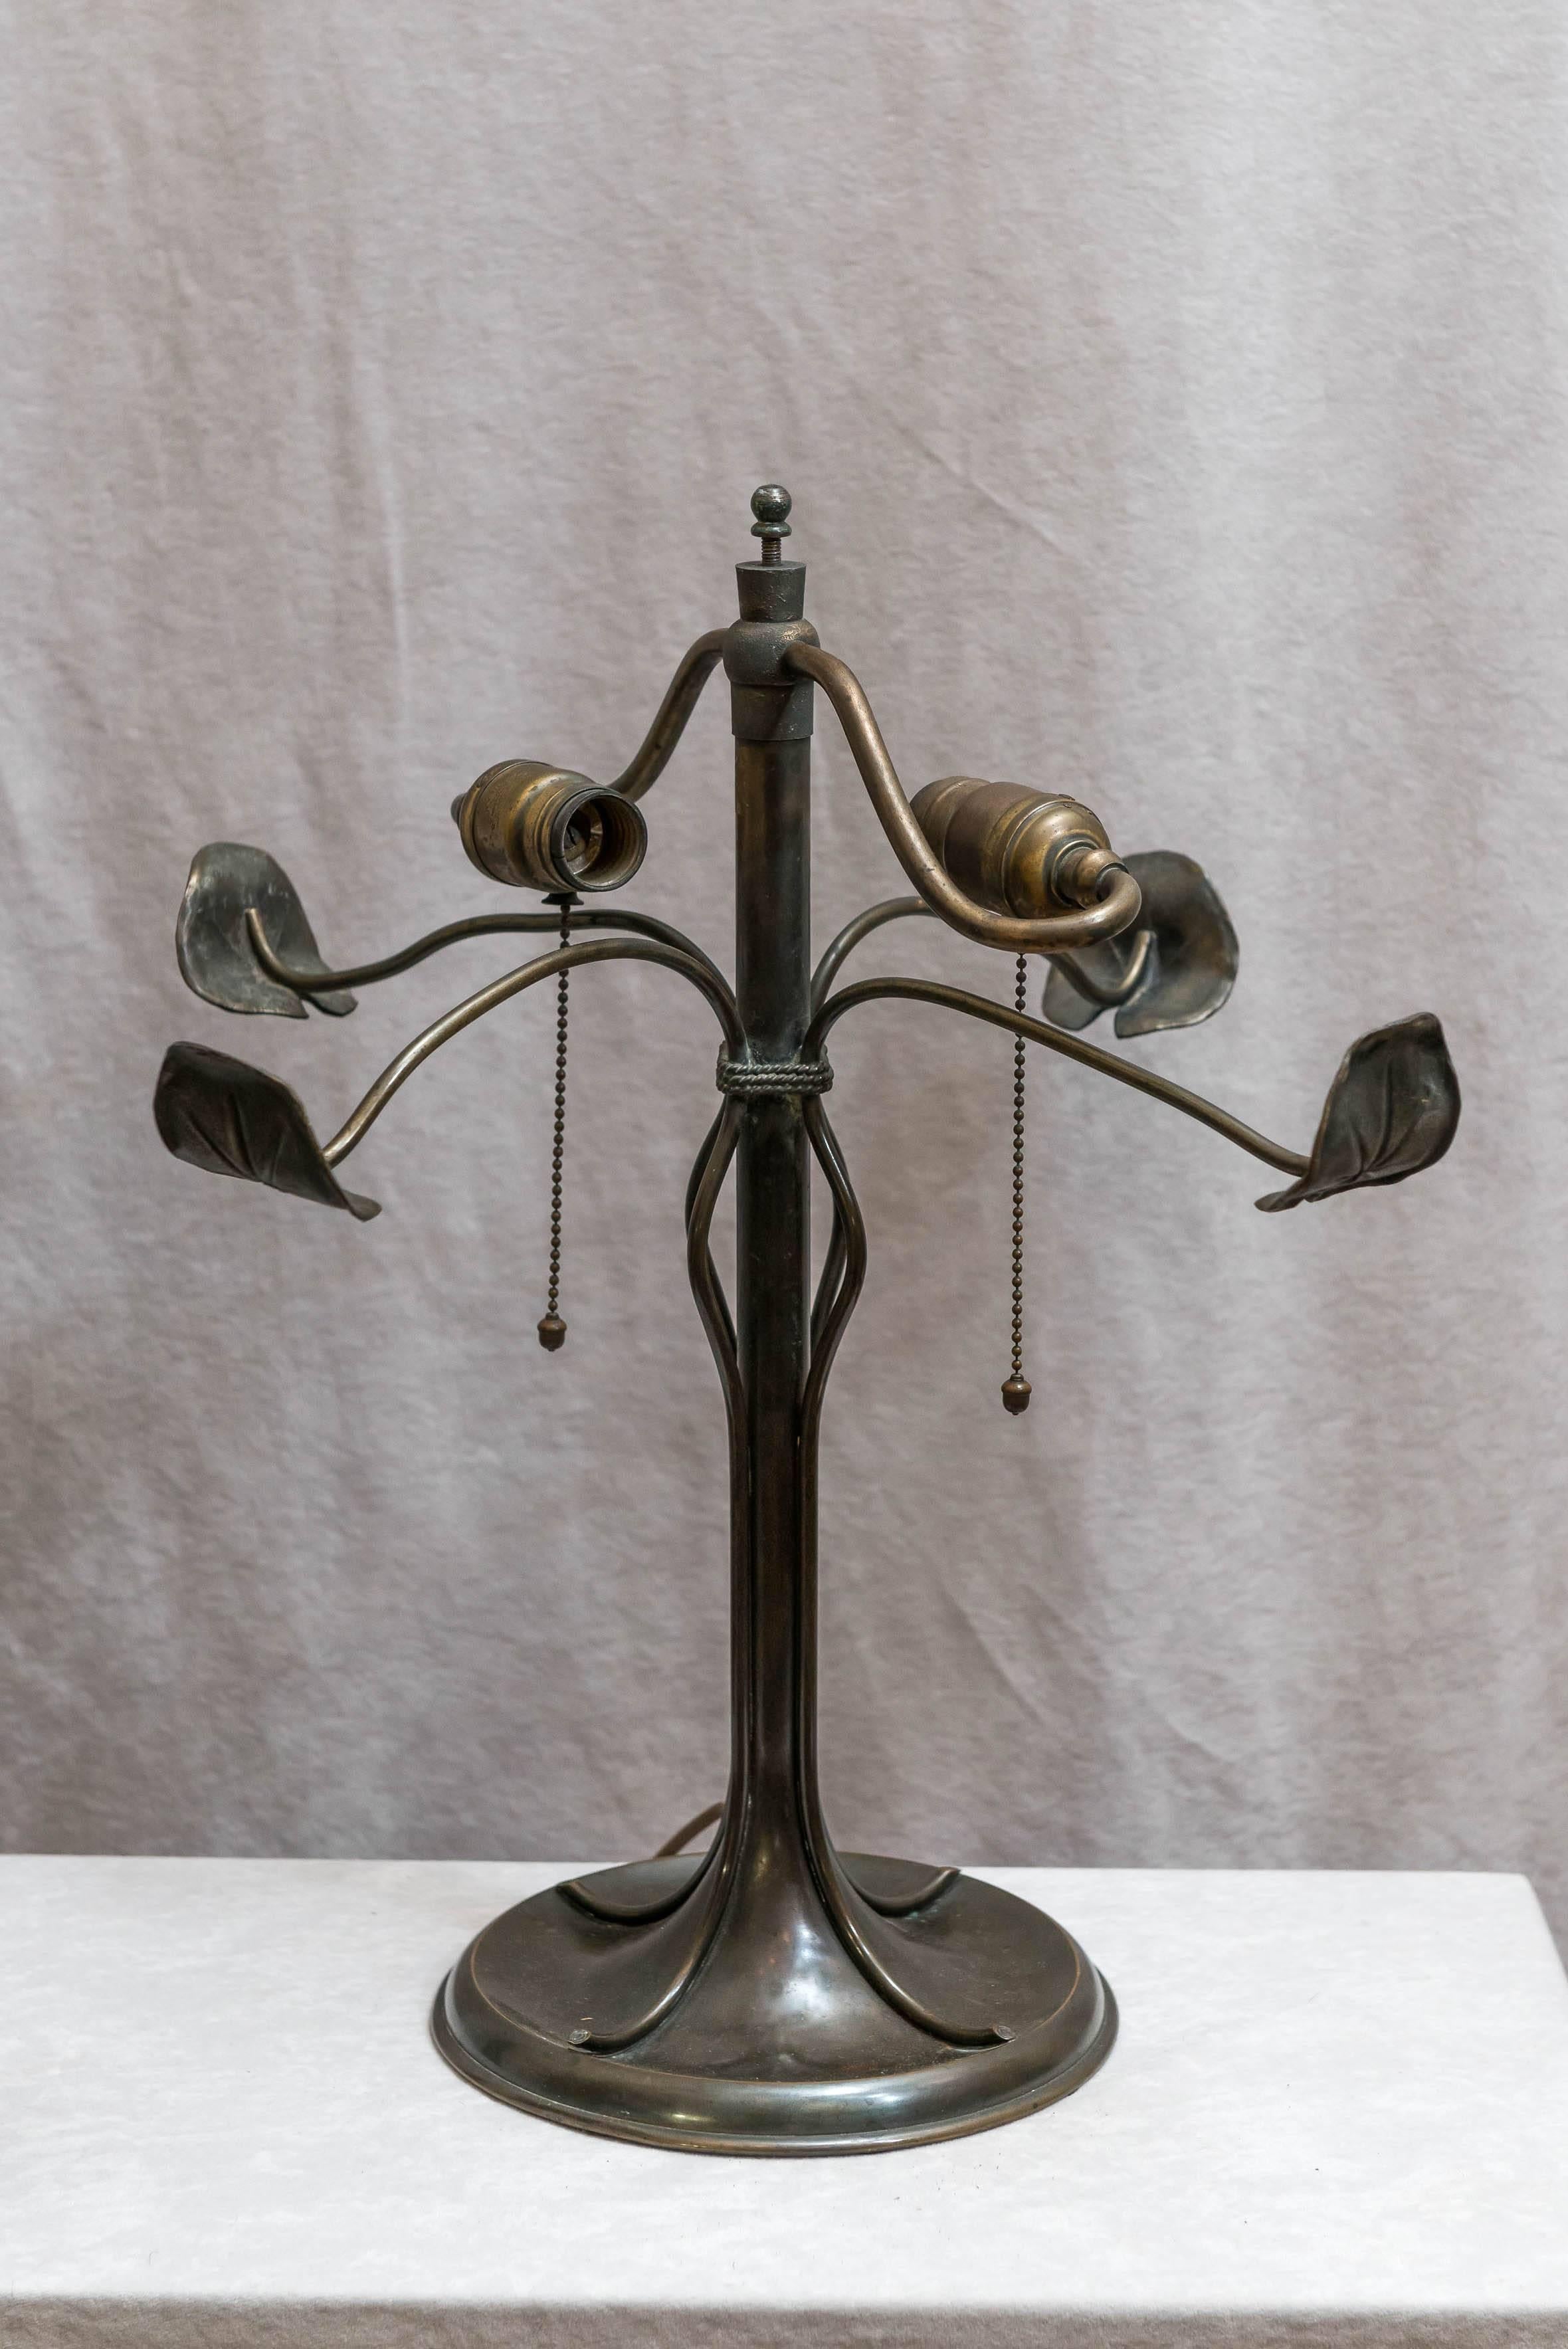 This lovely table lamp is quite unique. The Art Nouveau base is rather special, and is signed under the iron weight with the Bradley & Hubbard mark. The shade is very colorful with the dramatic red tulips. A very nice original package.